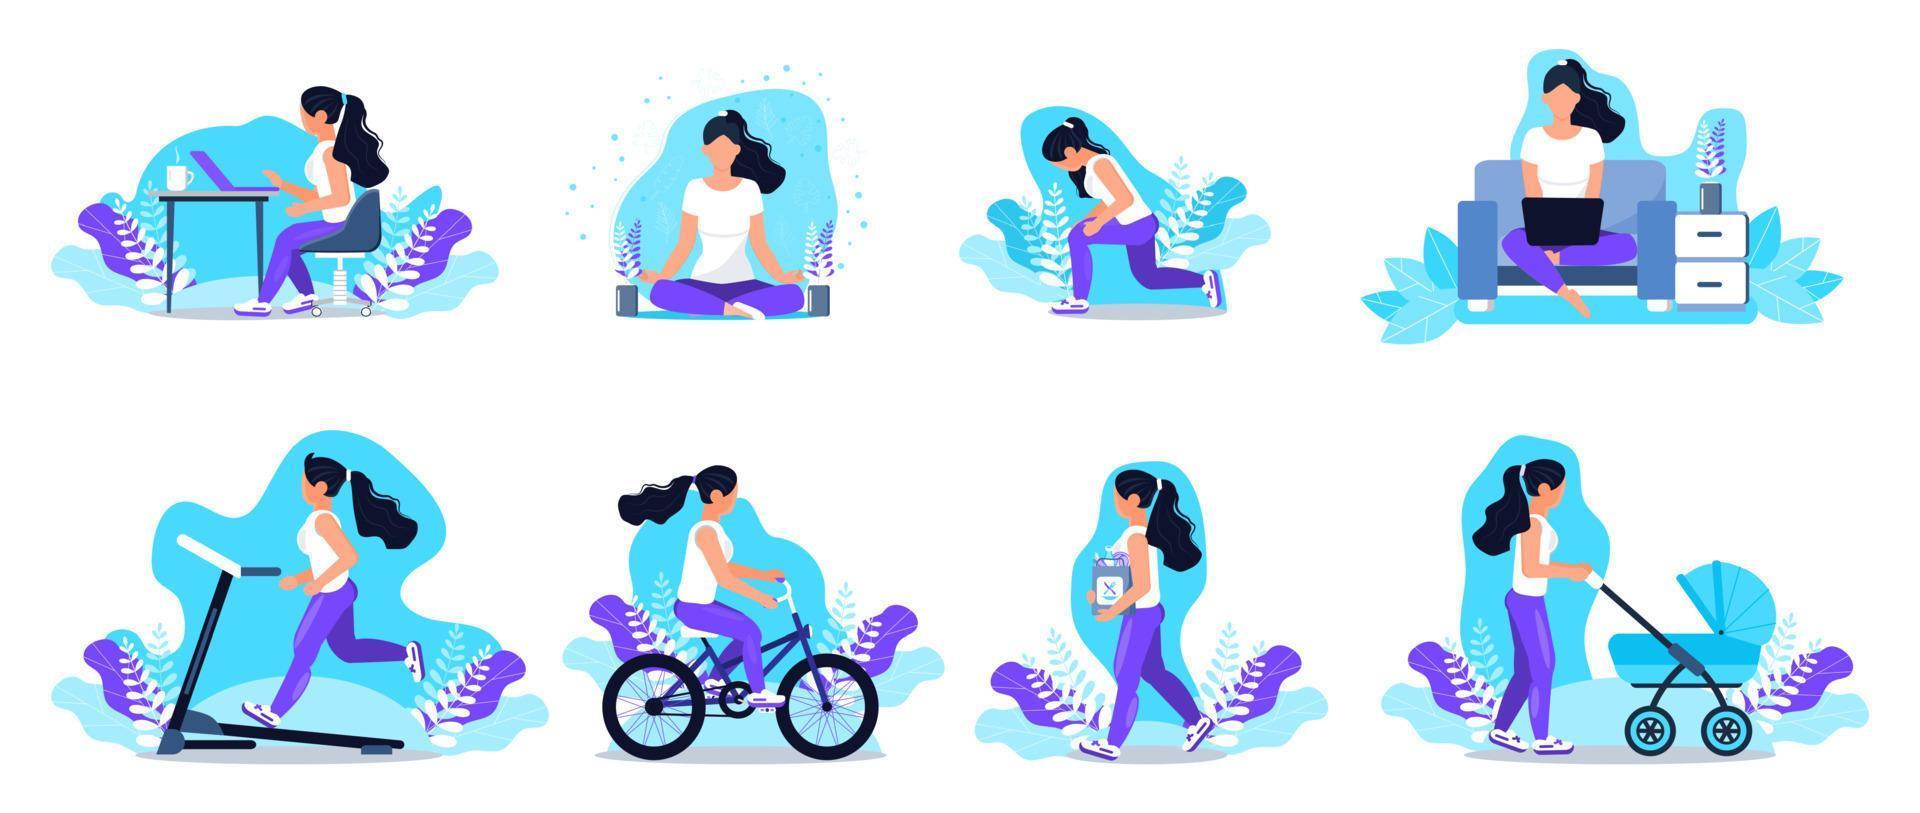 White woman is doing different outdoor activities. She is running, yoga, workout, riding a bicycle, walking with baby stroller. Girl is carrying package. Healthy lifestyle vector